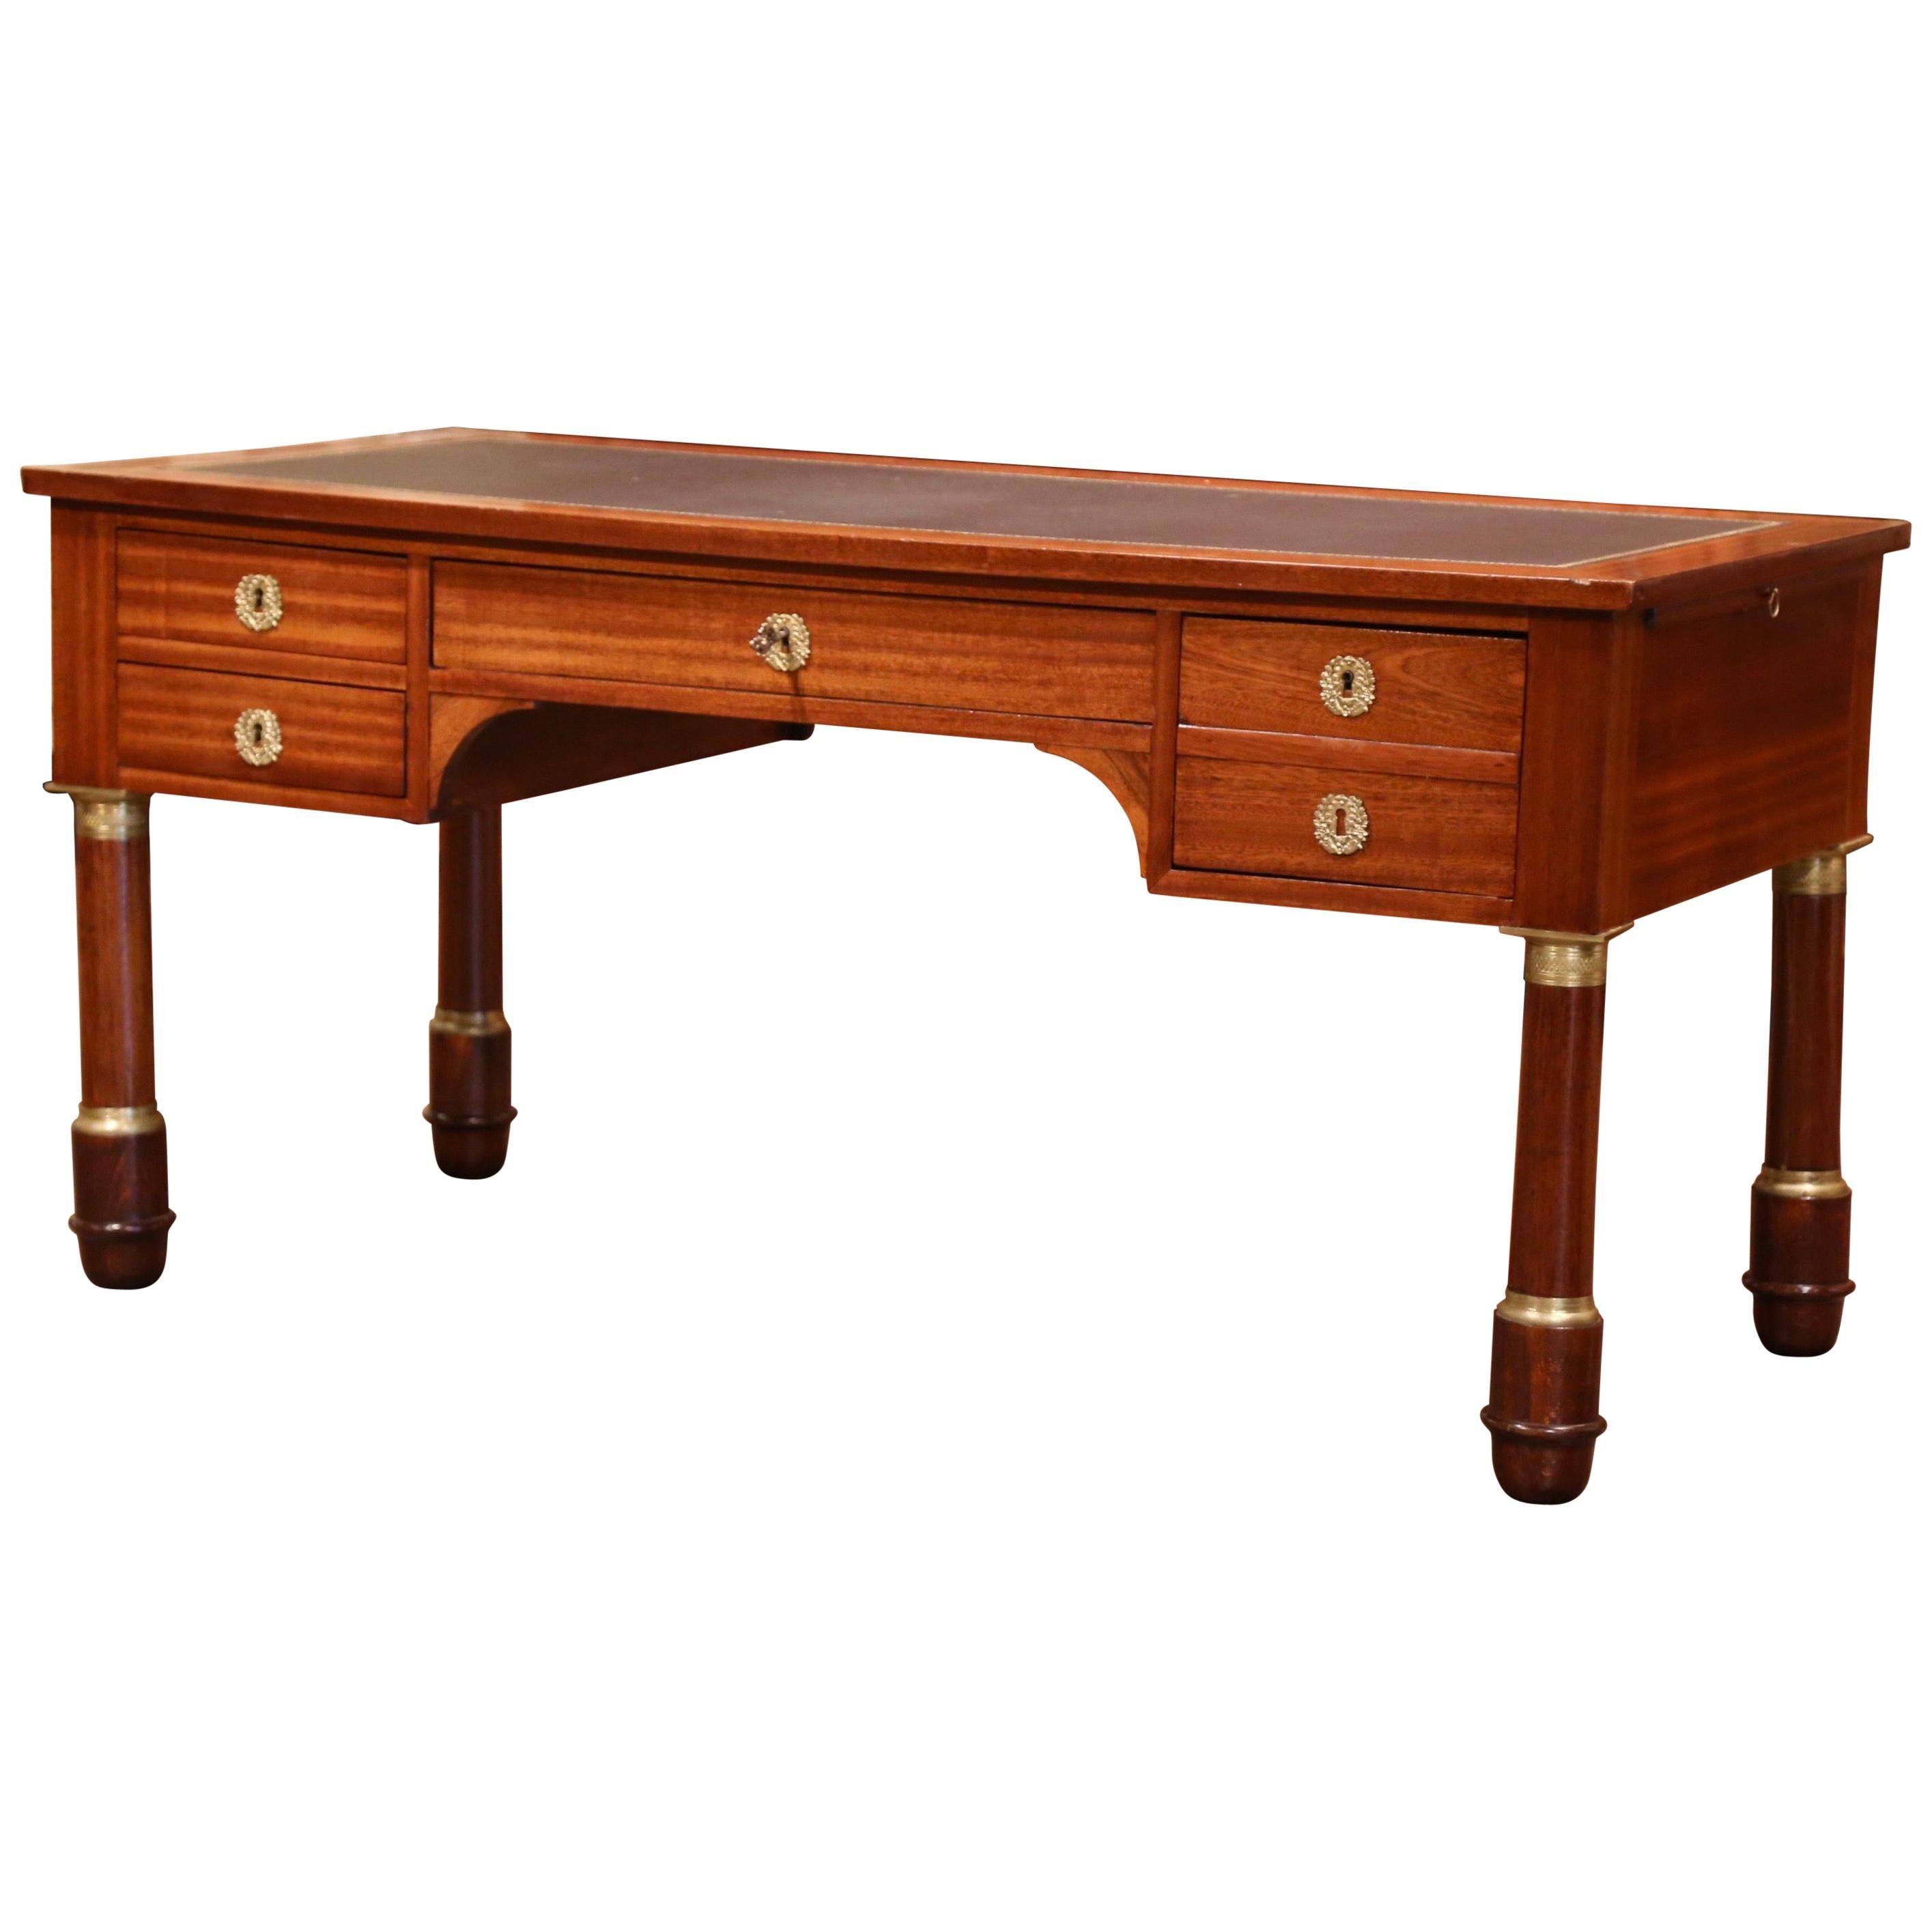 Early 20th Century French Empire Mahogany Desk with Embossed Leather Top